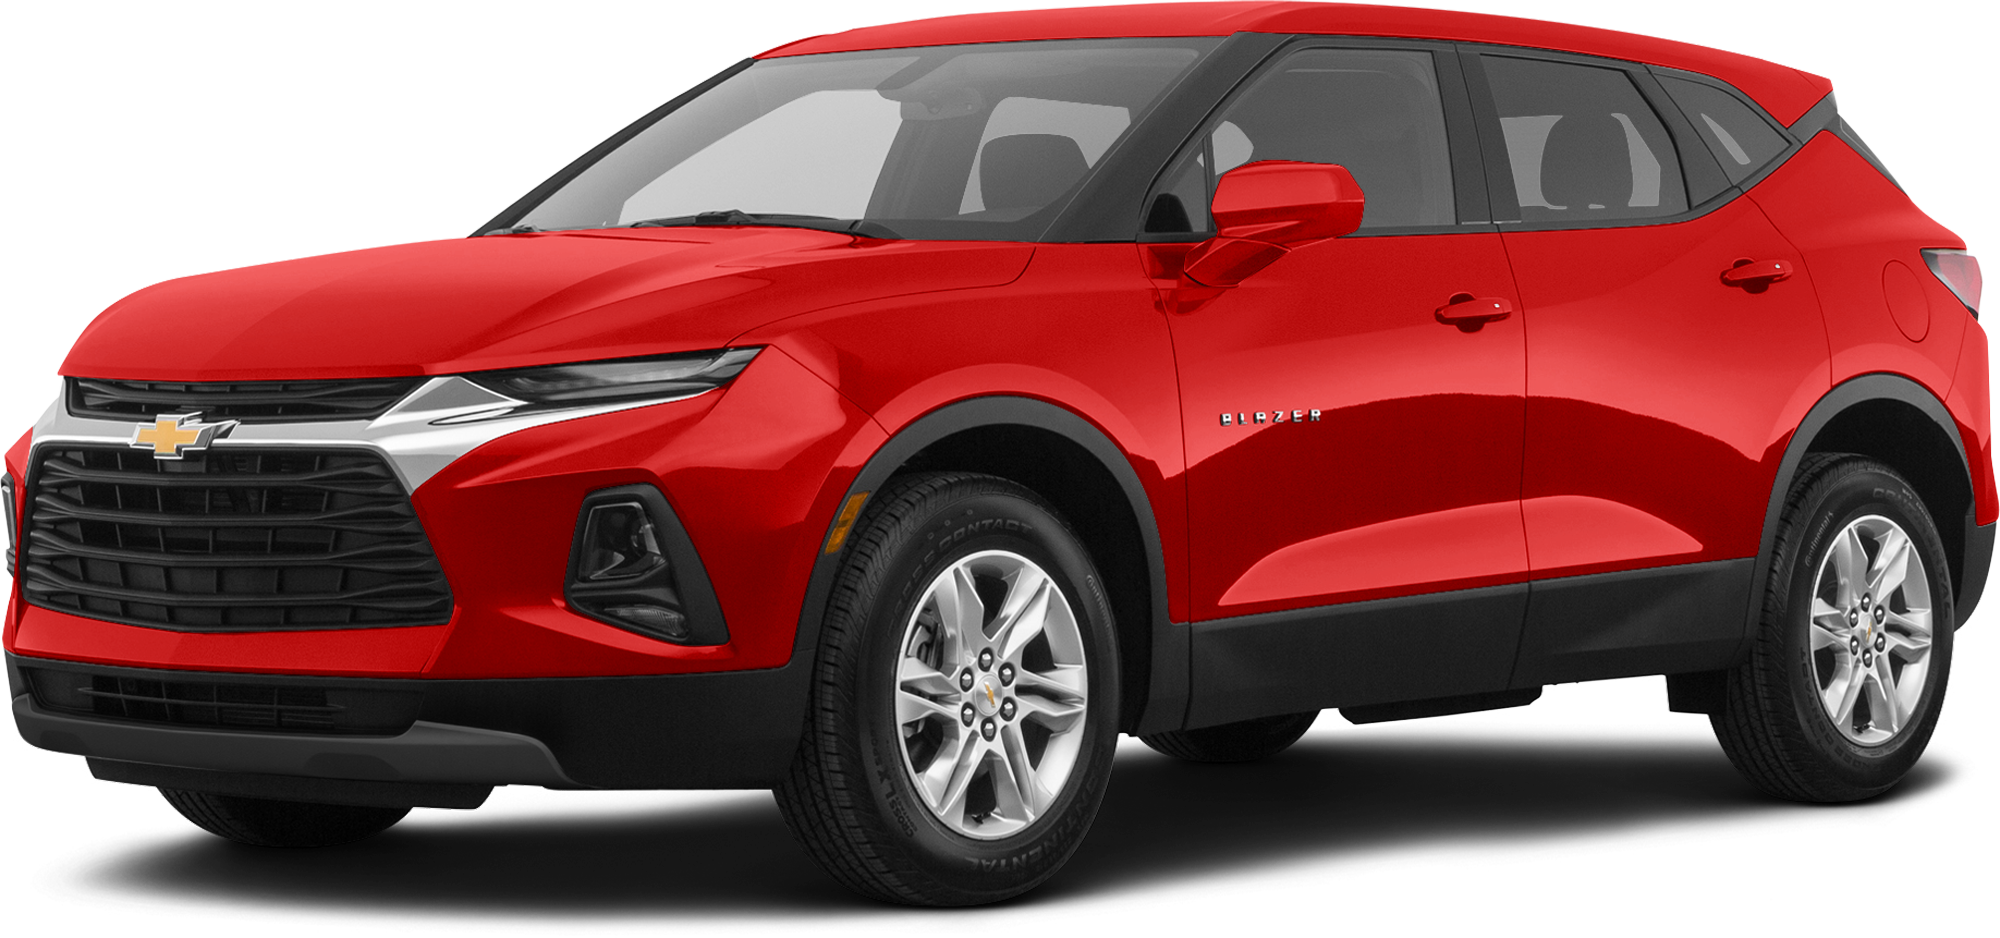 2022 Chevrolet Blazer Incentives, Specials & Offers in